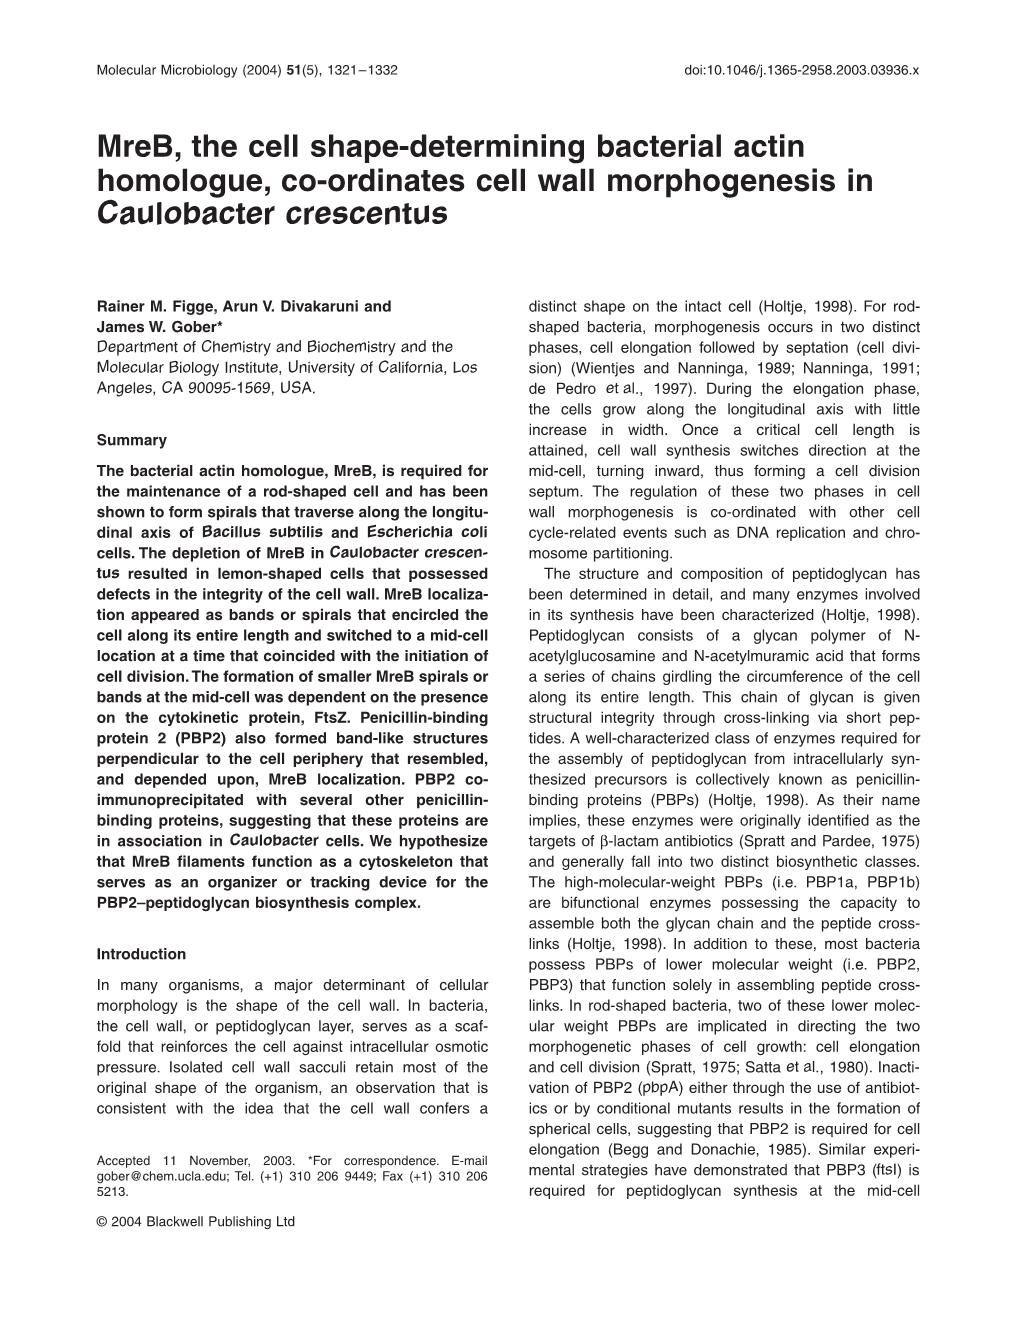 Mreb, the Cell Shape-Determining Bacterial Actin Homologue, Co-Ordinates Cell Wall Morphogenesis in Caulobacter Crescentus